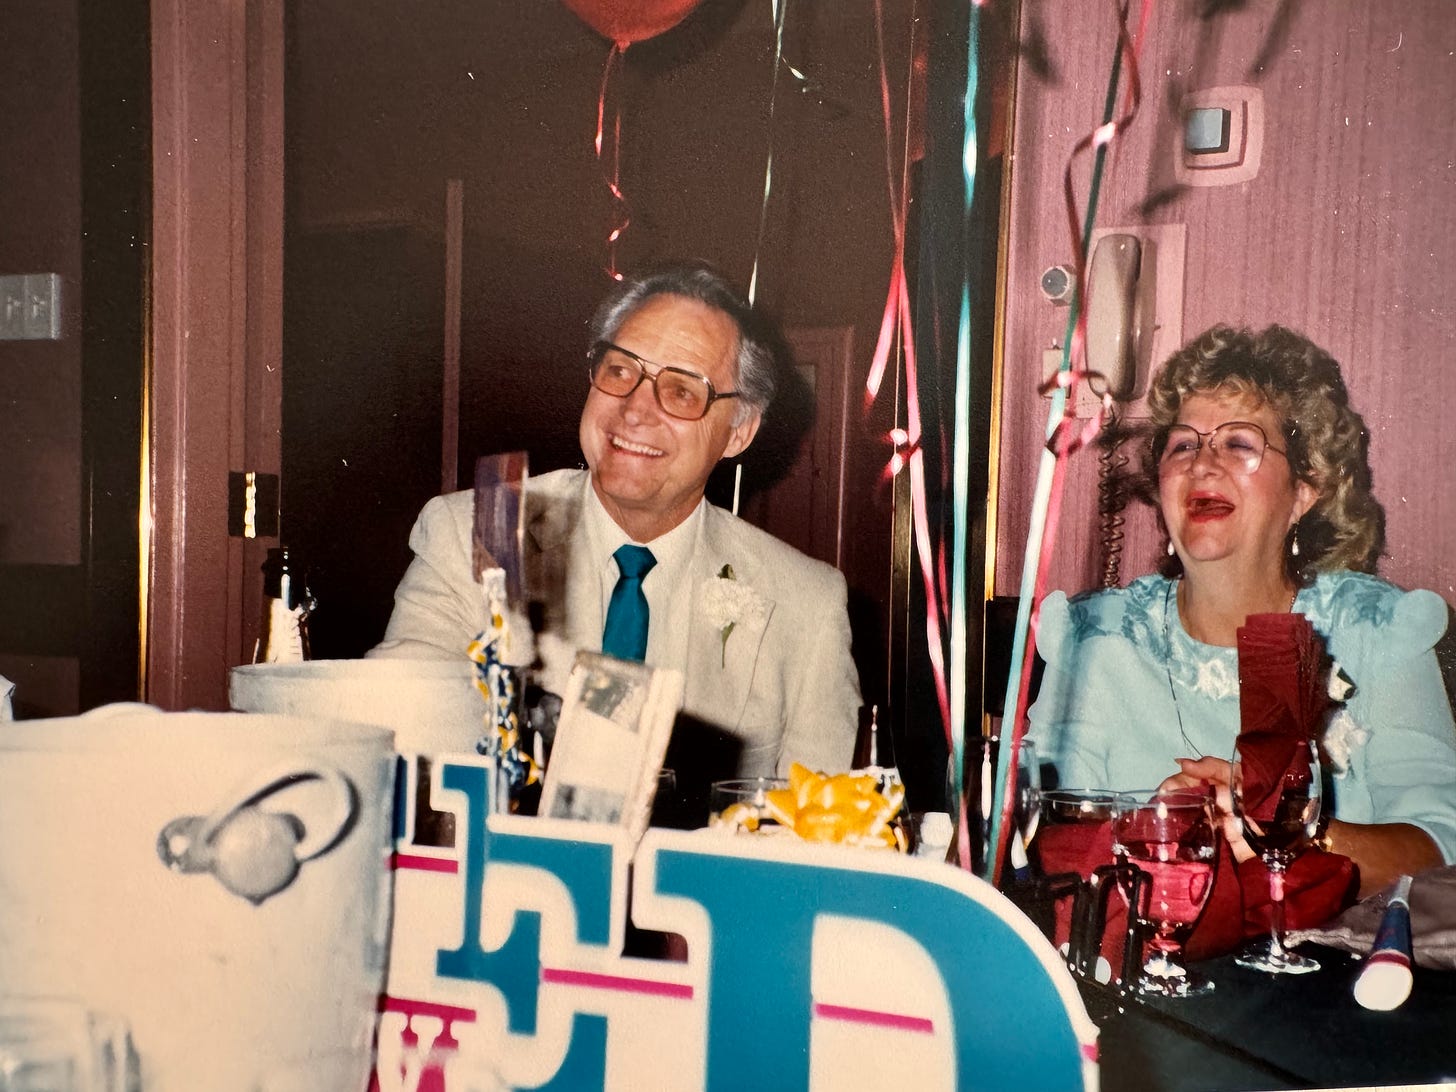 A 50-something-year-old white man and his wife sit smiling amongst party favors celebrating the man's retirement.